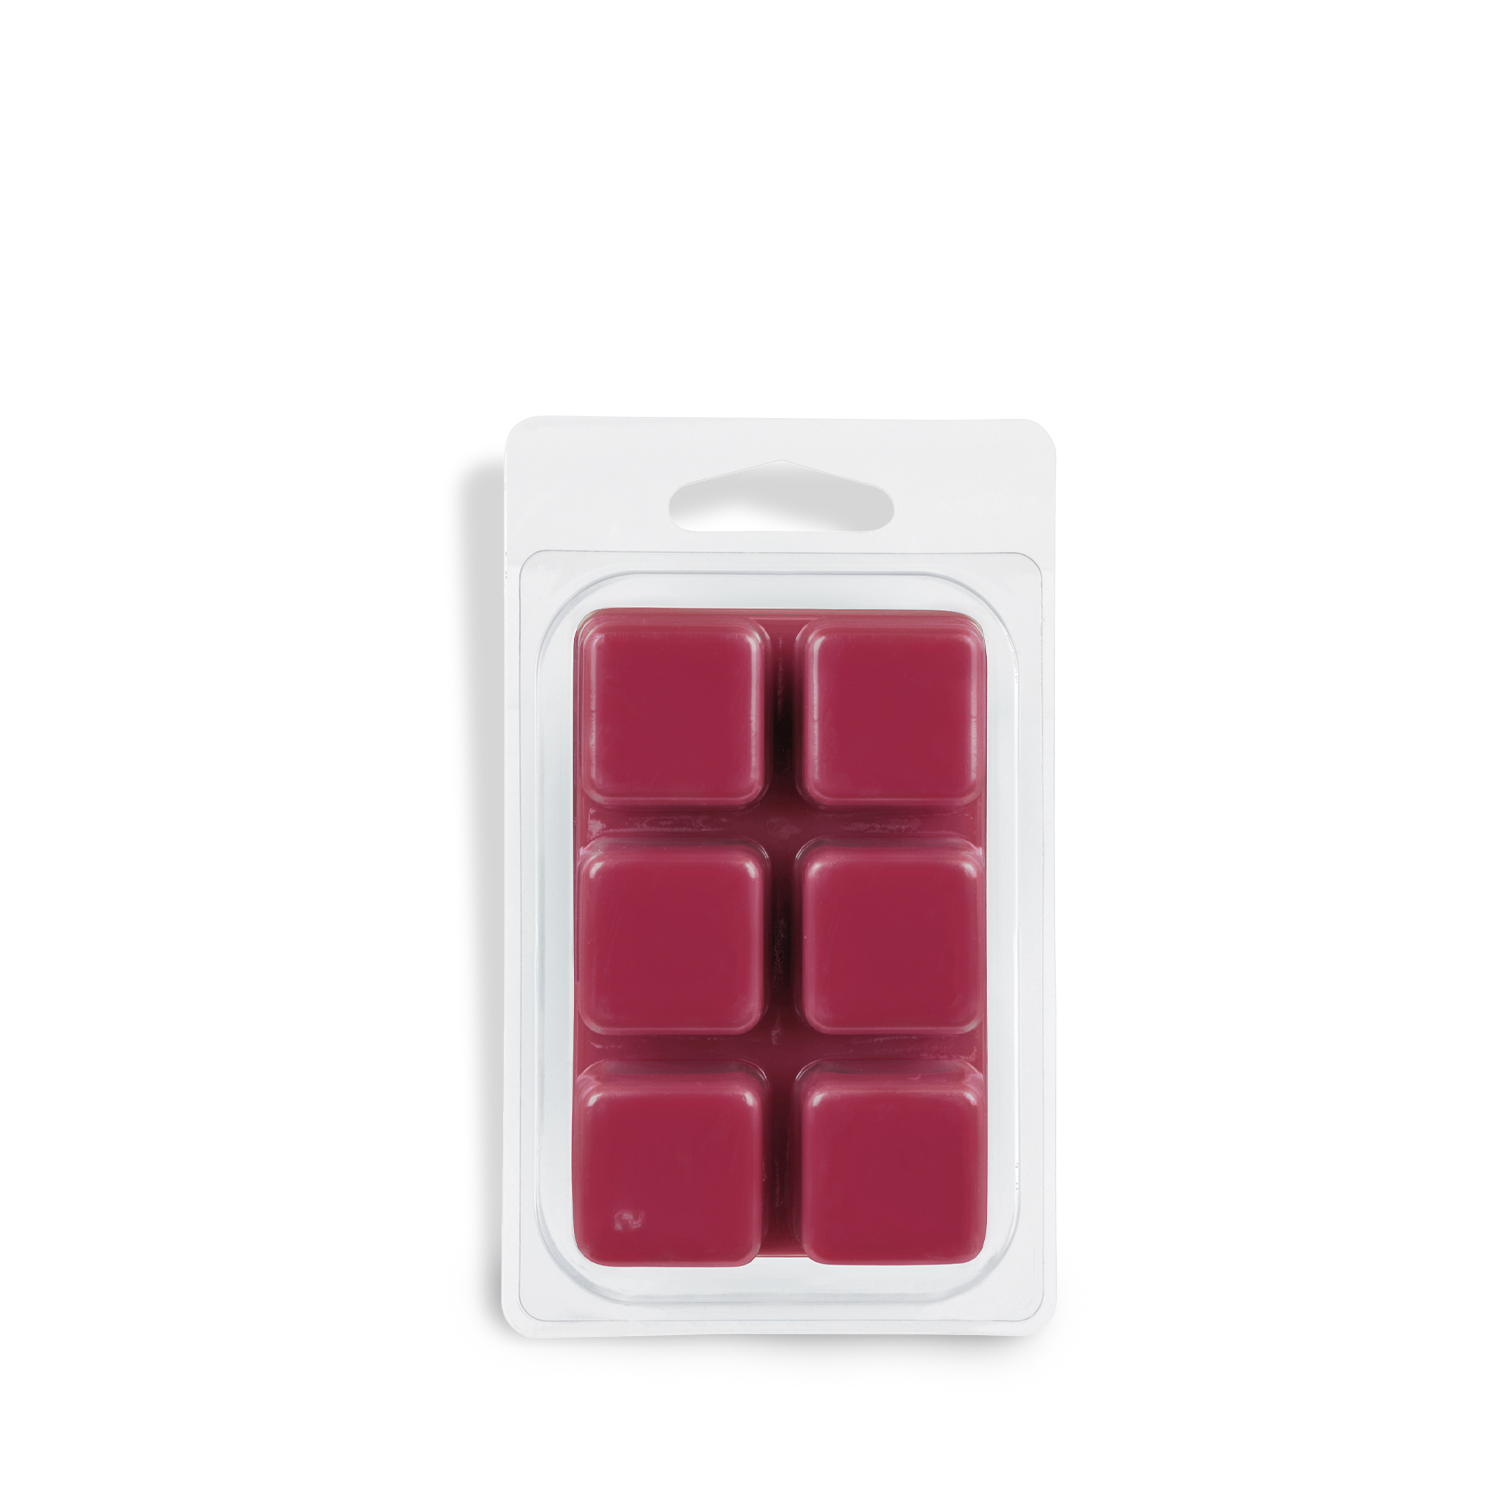 A pack of Wine & Roses Scented Wax Melt (2.5 oz) tart bars from Tuscany Candle® EVD on a white background.